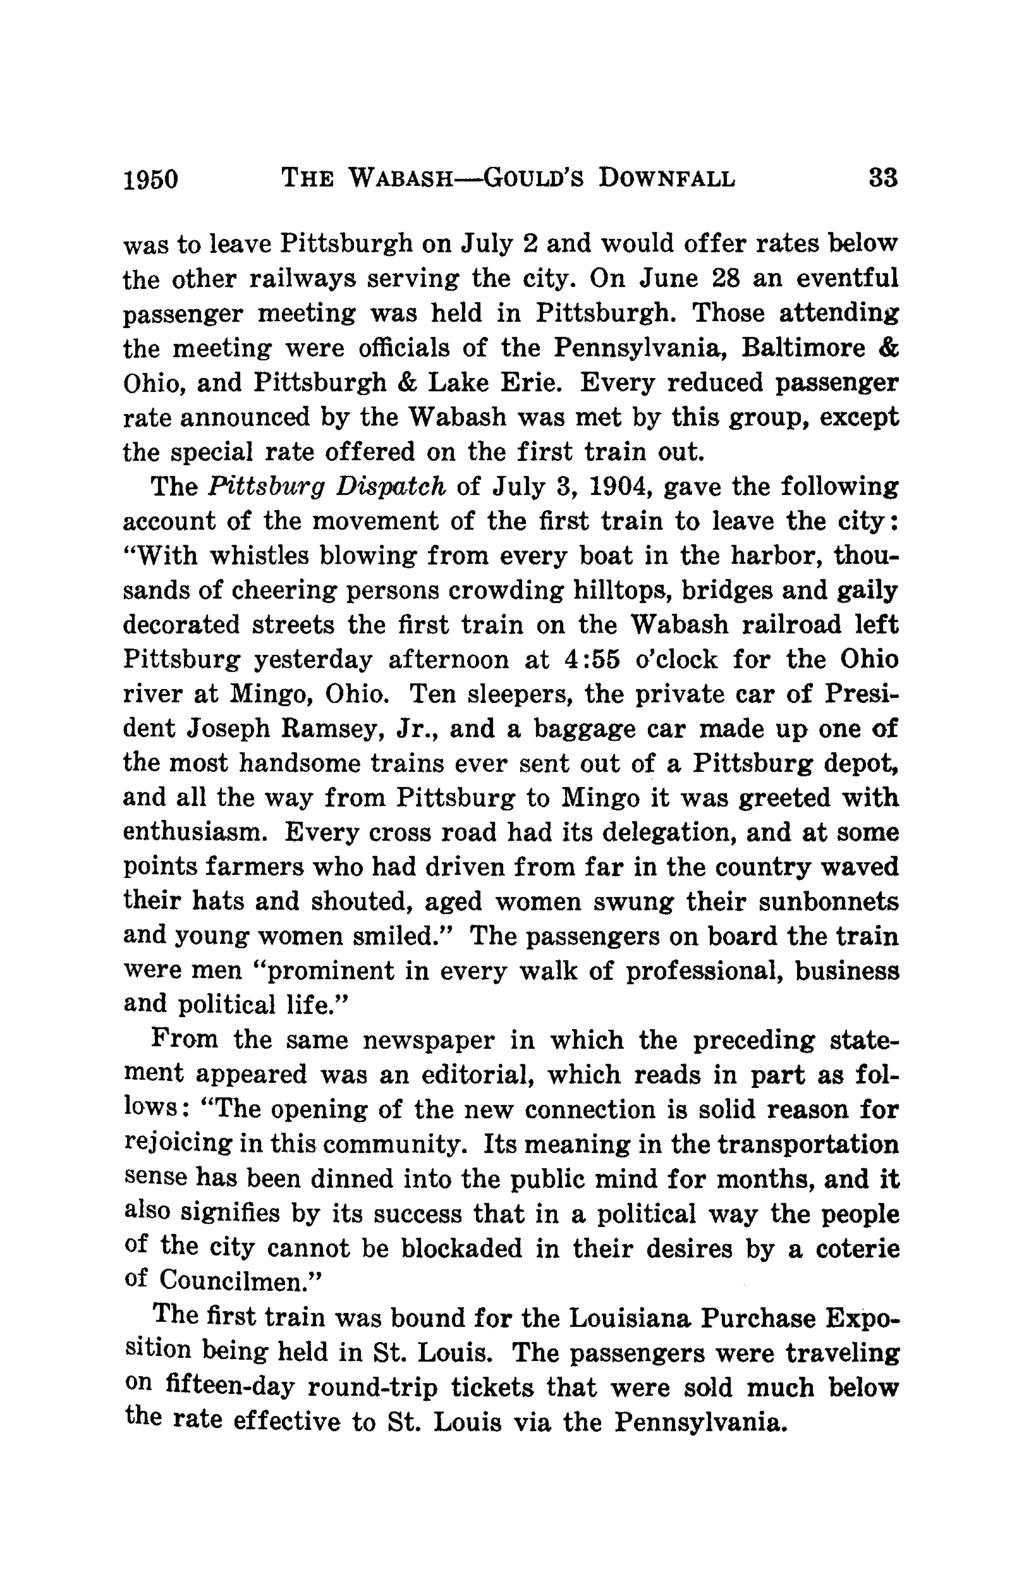 1950 The Wabash Gould's Downfall 33 was to leave Pittsburgh on July 2 and would offer rates below the other railways serving the city. On June 28 an eventful passenger meeting was held in Pittsburgh.